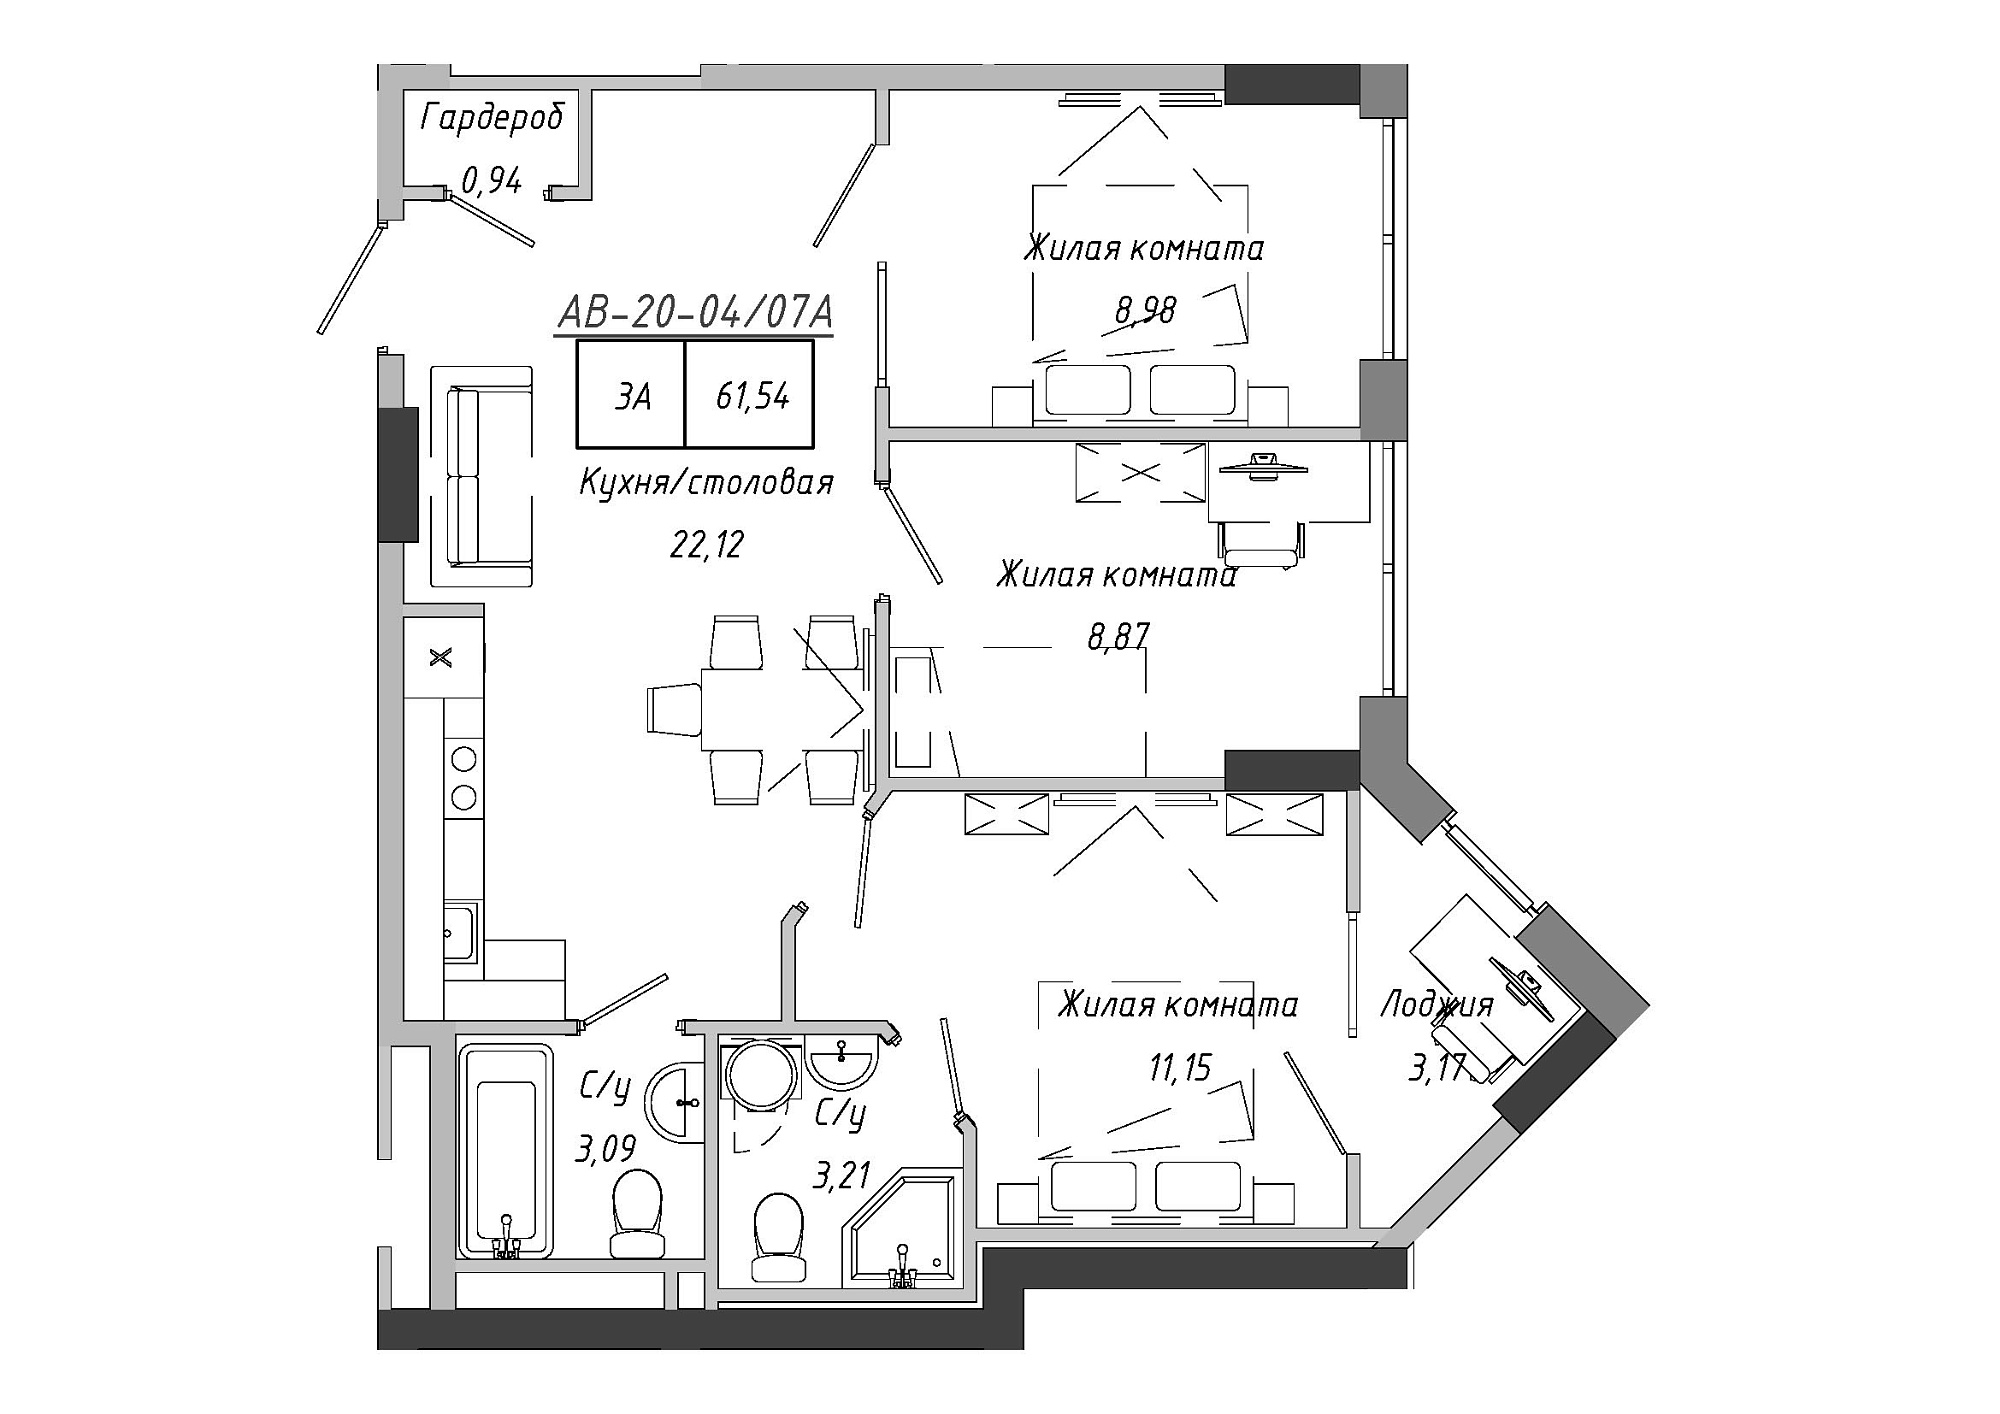 Planning 3-rm flats area 61.54m2, AB-20-04/0007а.